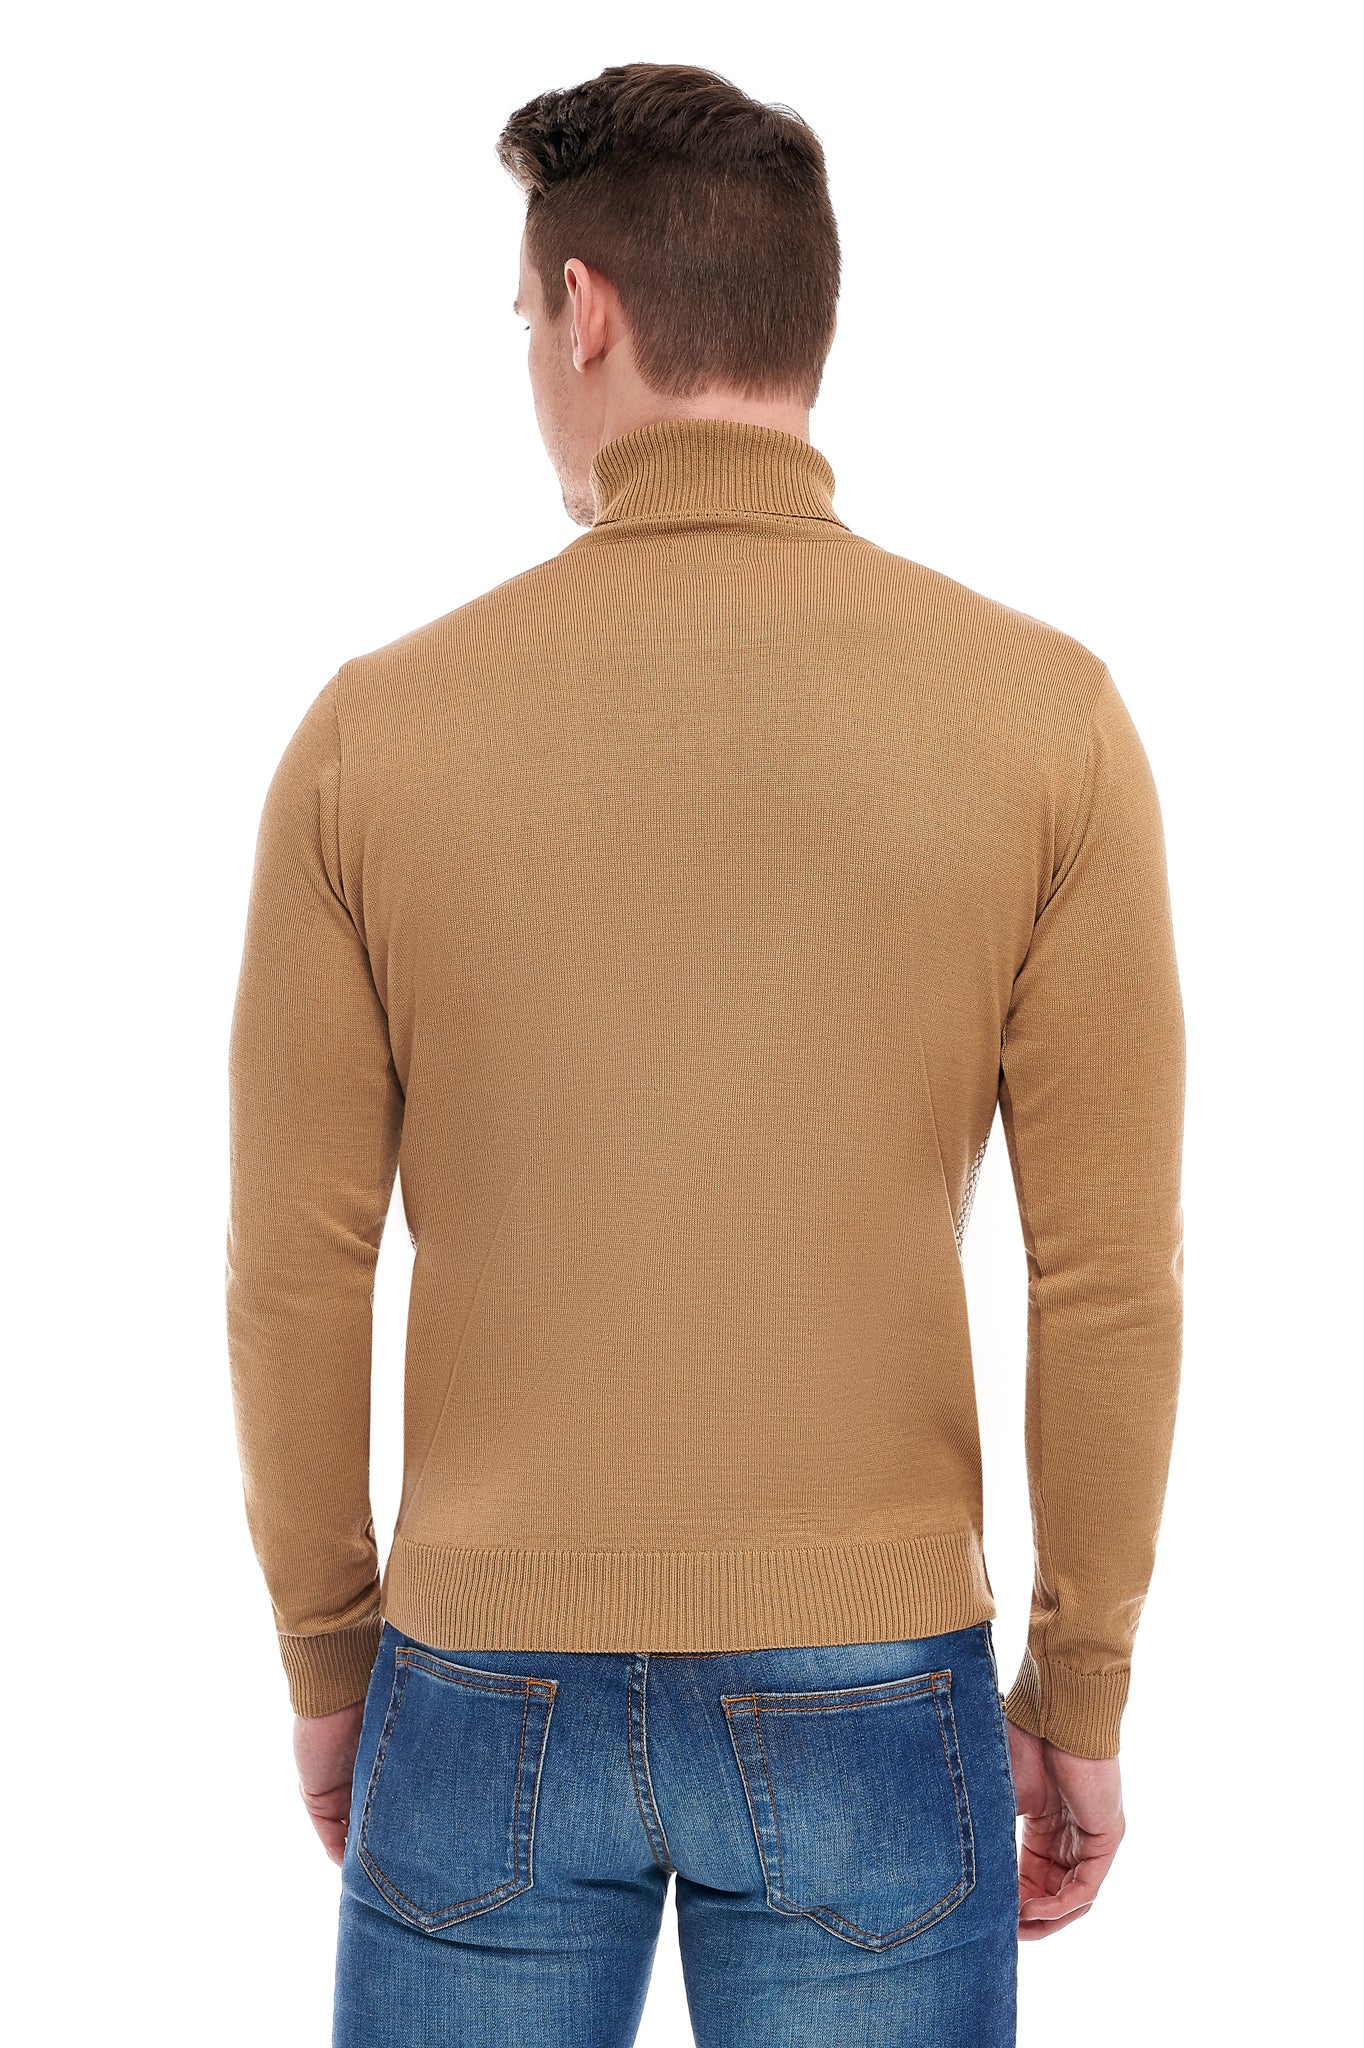 Beige Sweater With Wool